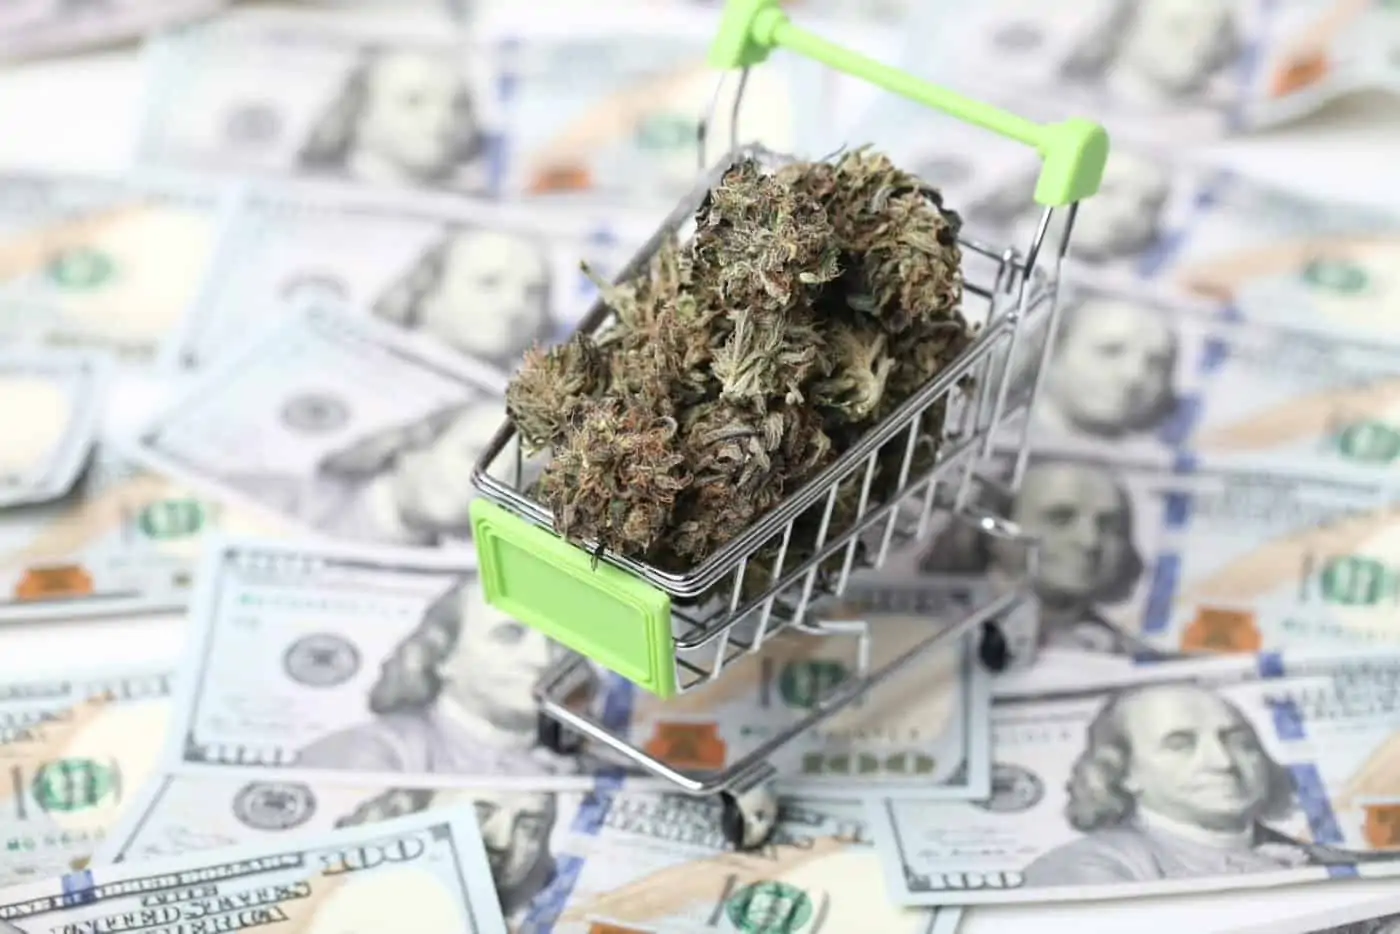 How to Start a Cannabis Business in 2022